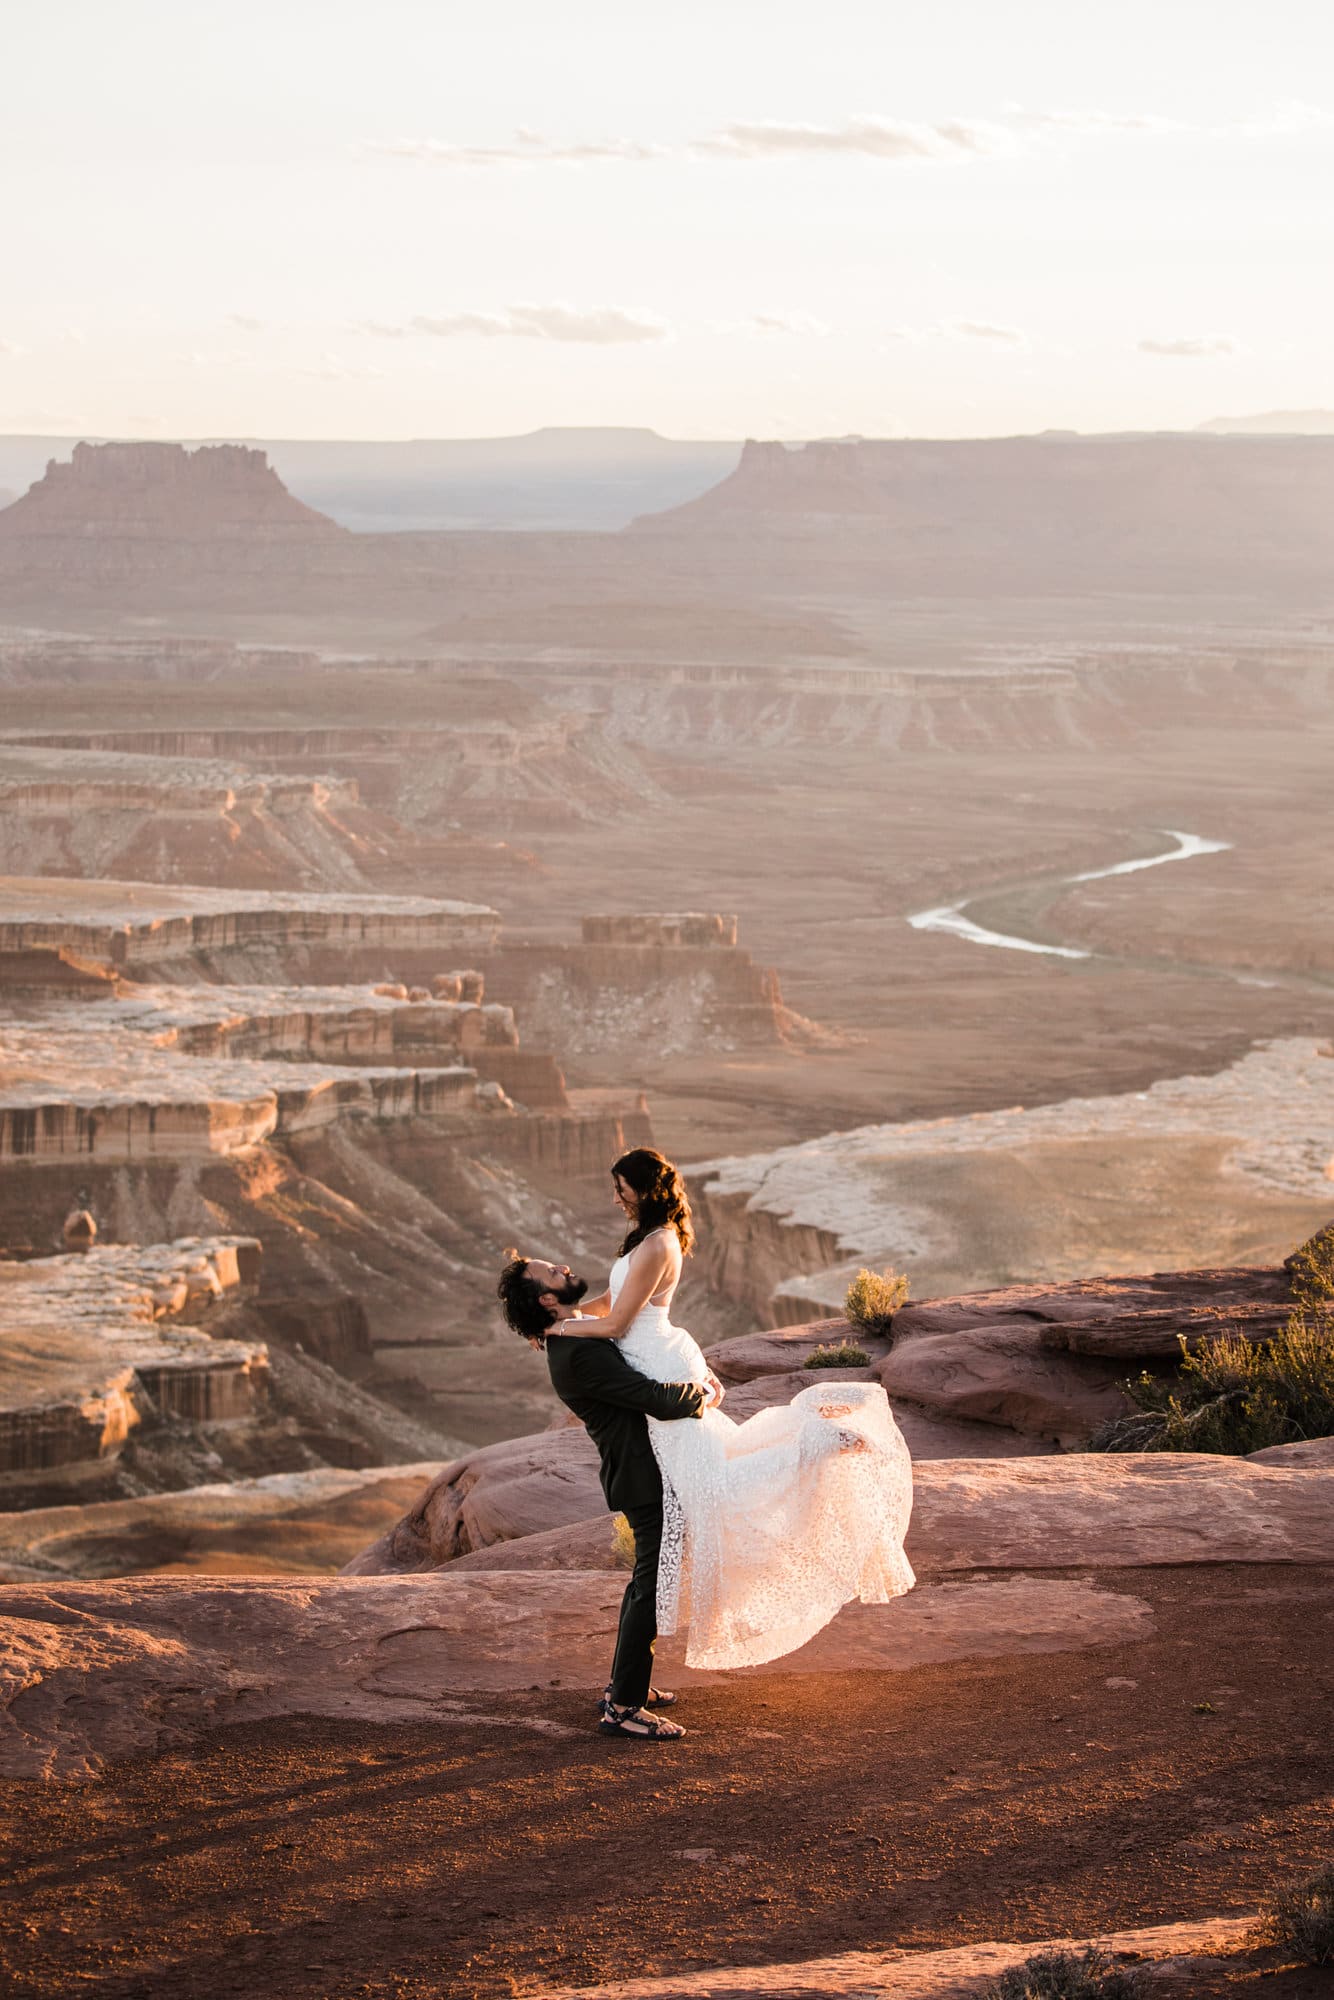 Where adventure lives. Experience the magic and adventure of a Moab Elopement. Check out my complete guide on all you need to know on how to elope in Moab.